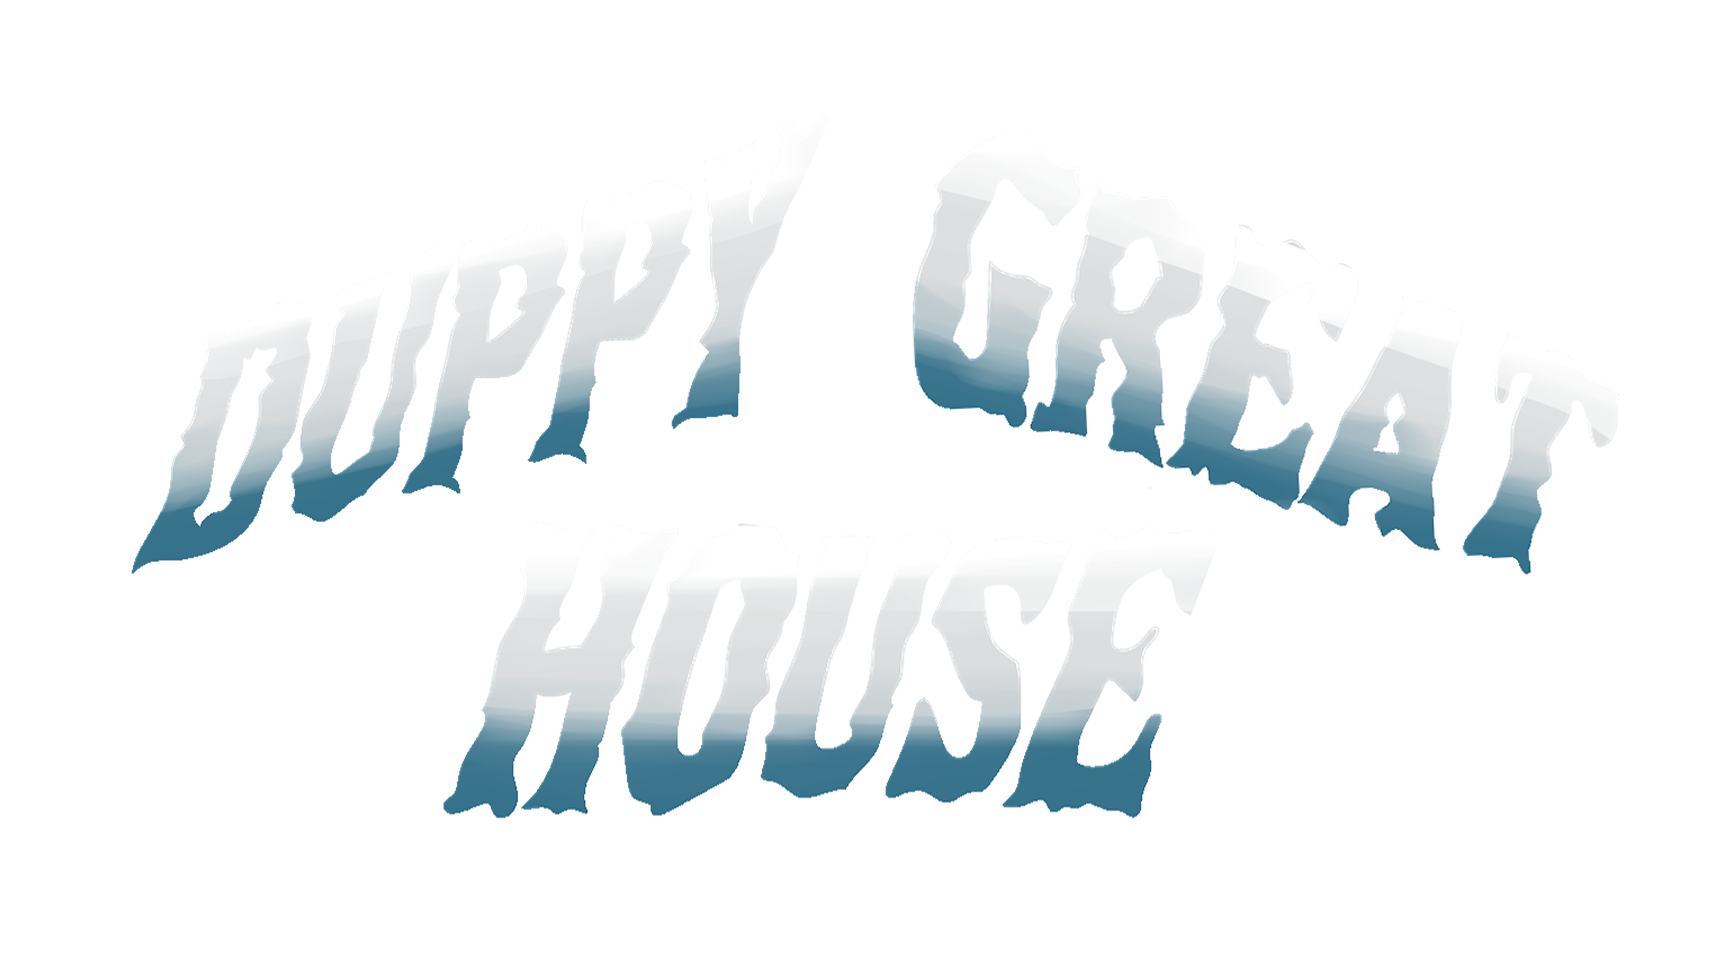 Duppy Great House